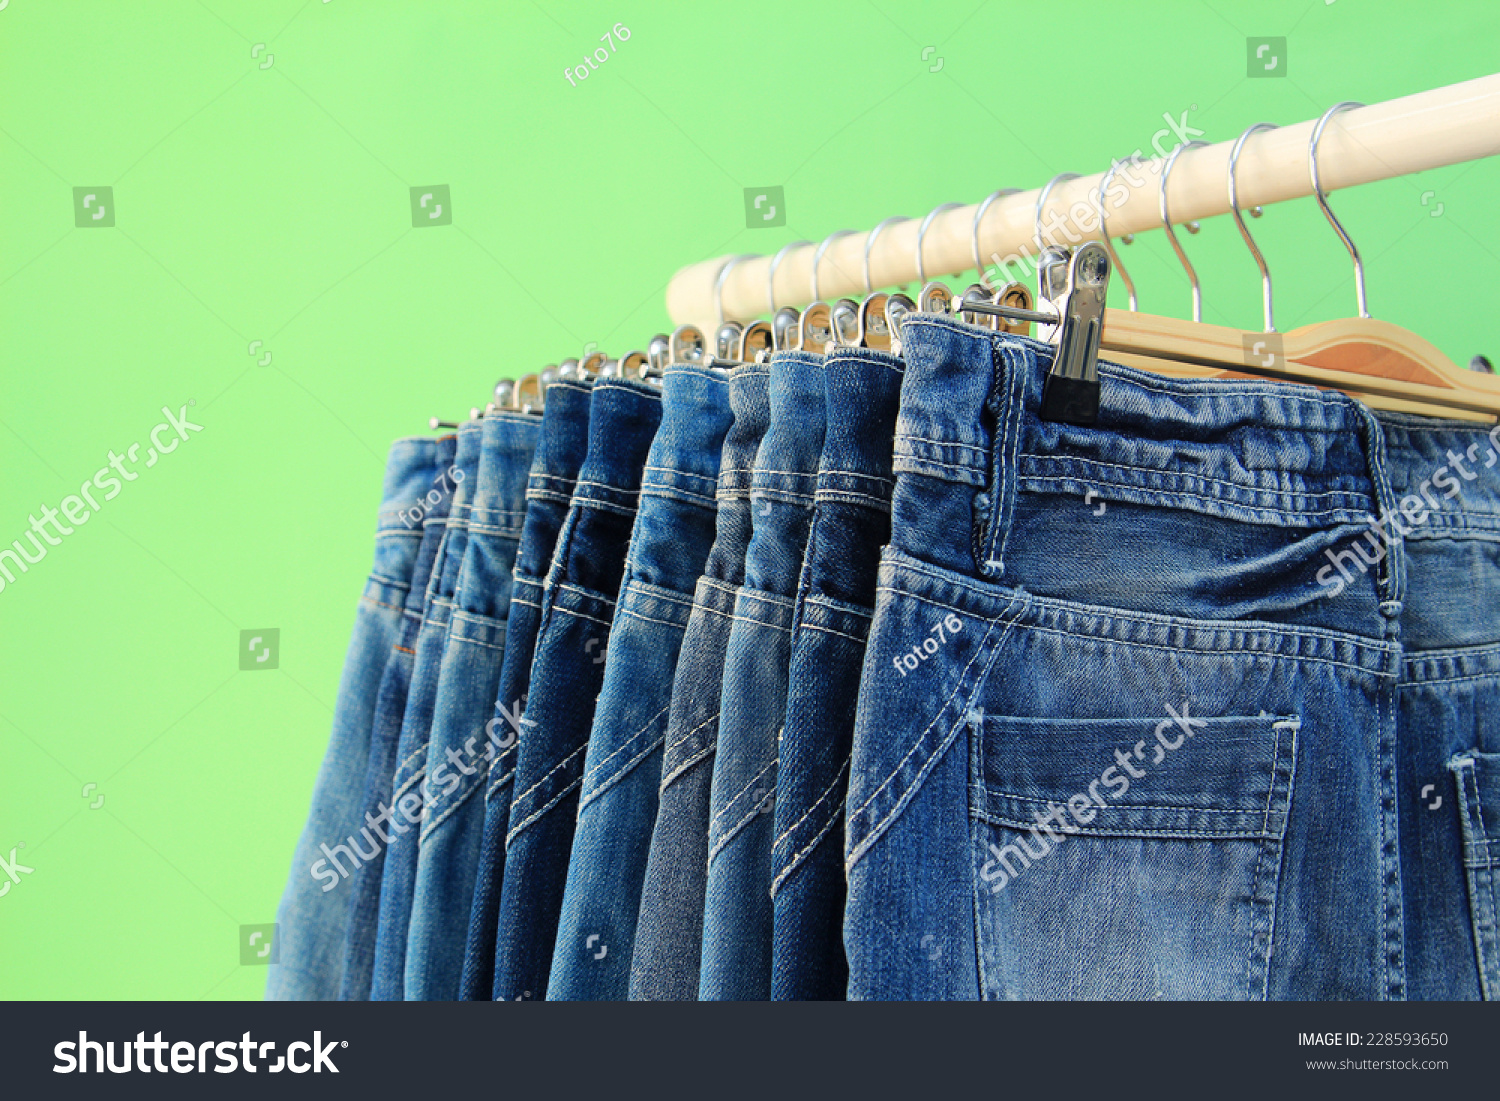 Row Of Hanged Blue Jeans Stock Photo 228593650 : Shutterstock